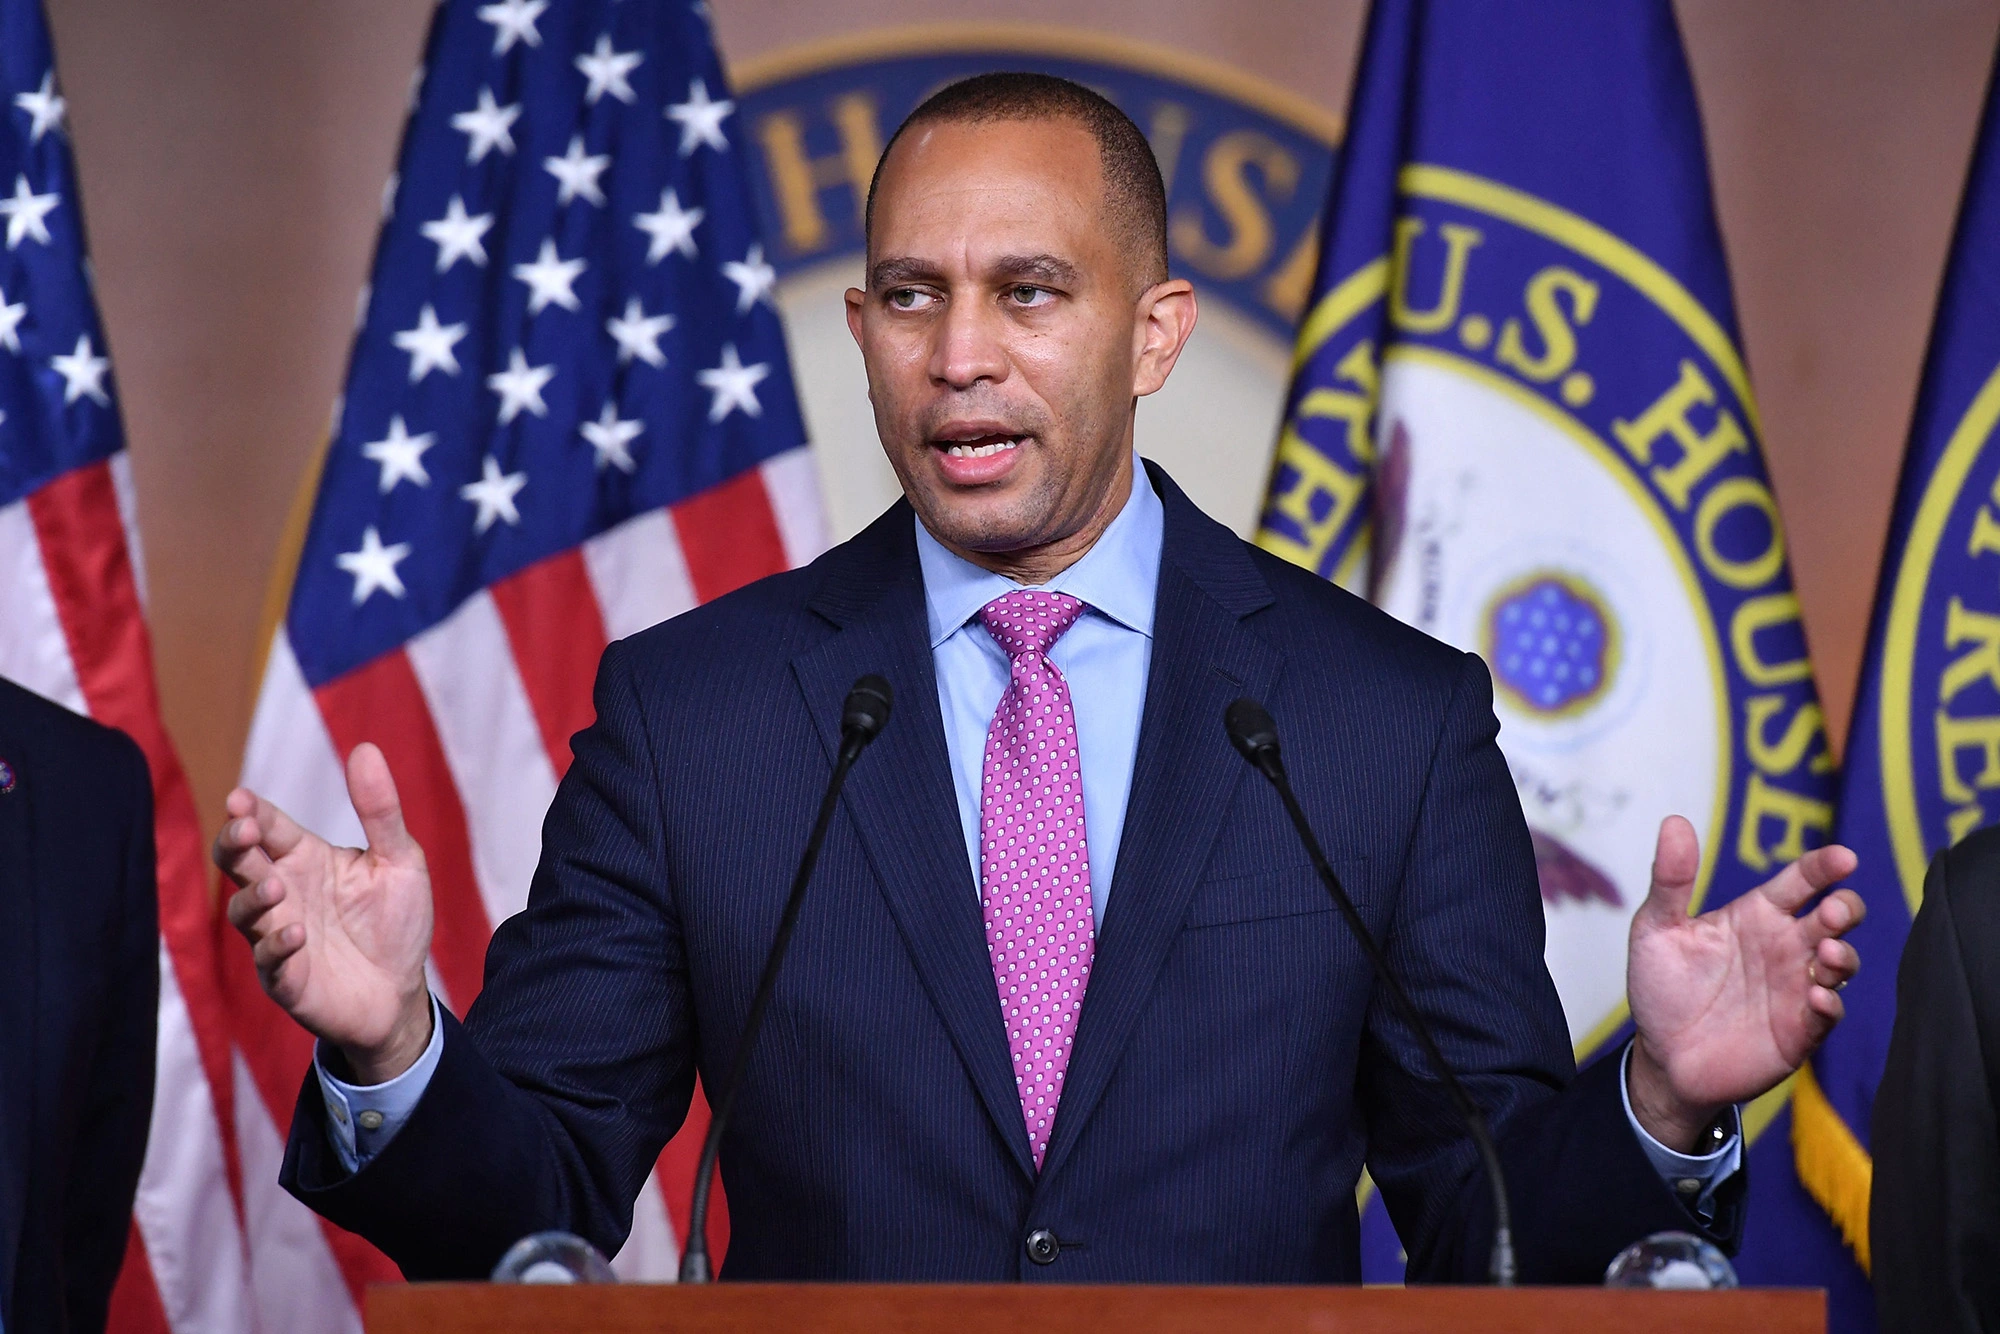 PRESS RELEASE: American Jewish Congress Congratulates Rep. Hakeem Jeffries on Election as the New House Democratic Leader